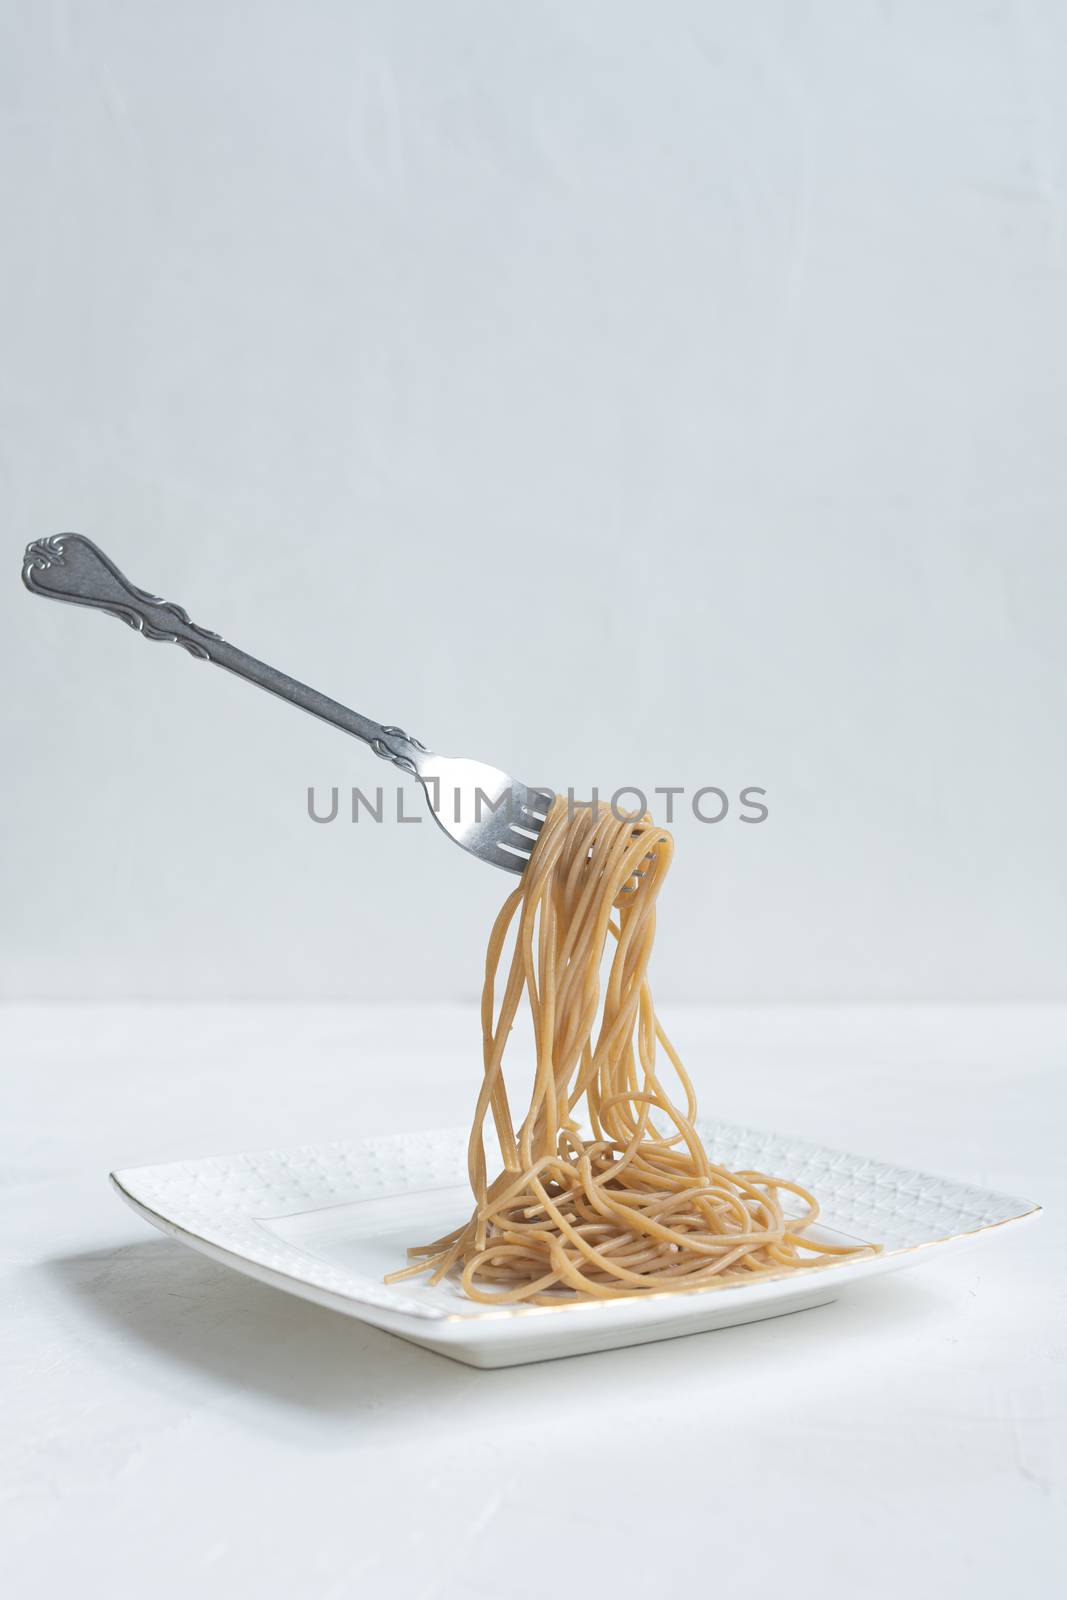 spaghetti made from buckwheat on a white table.